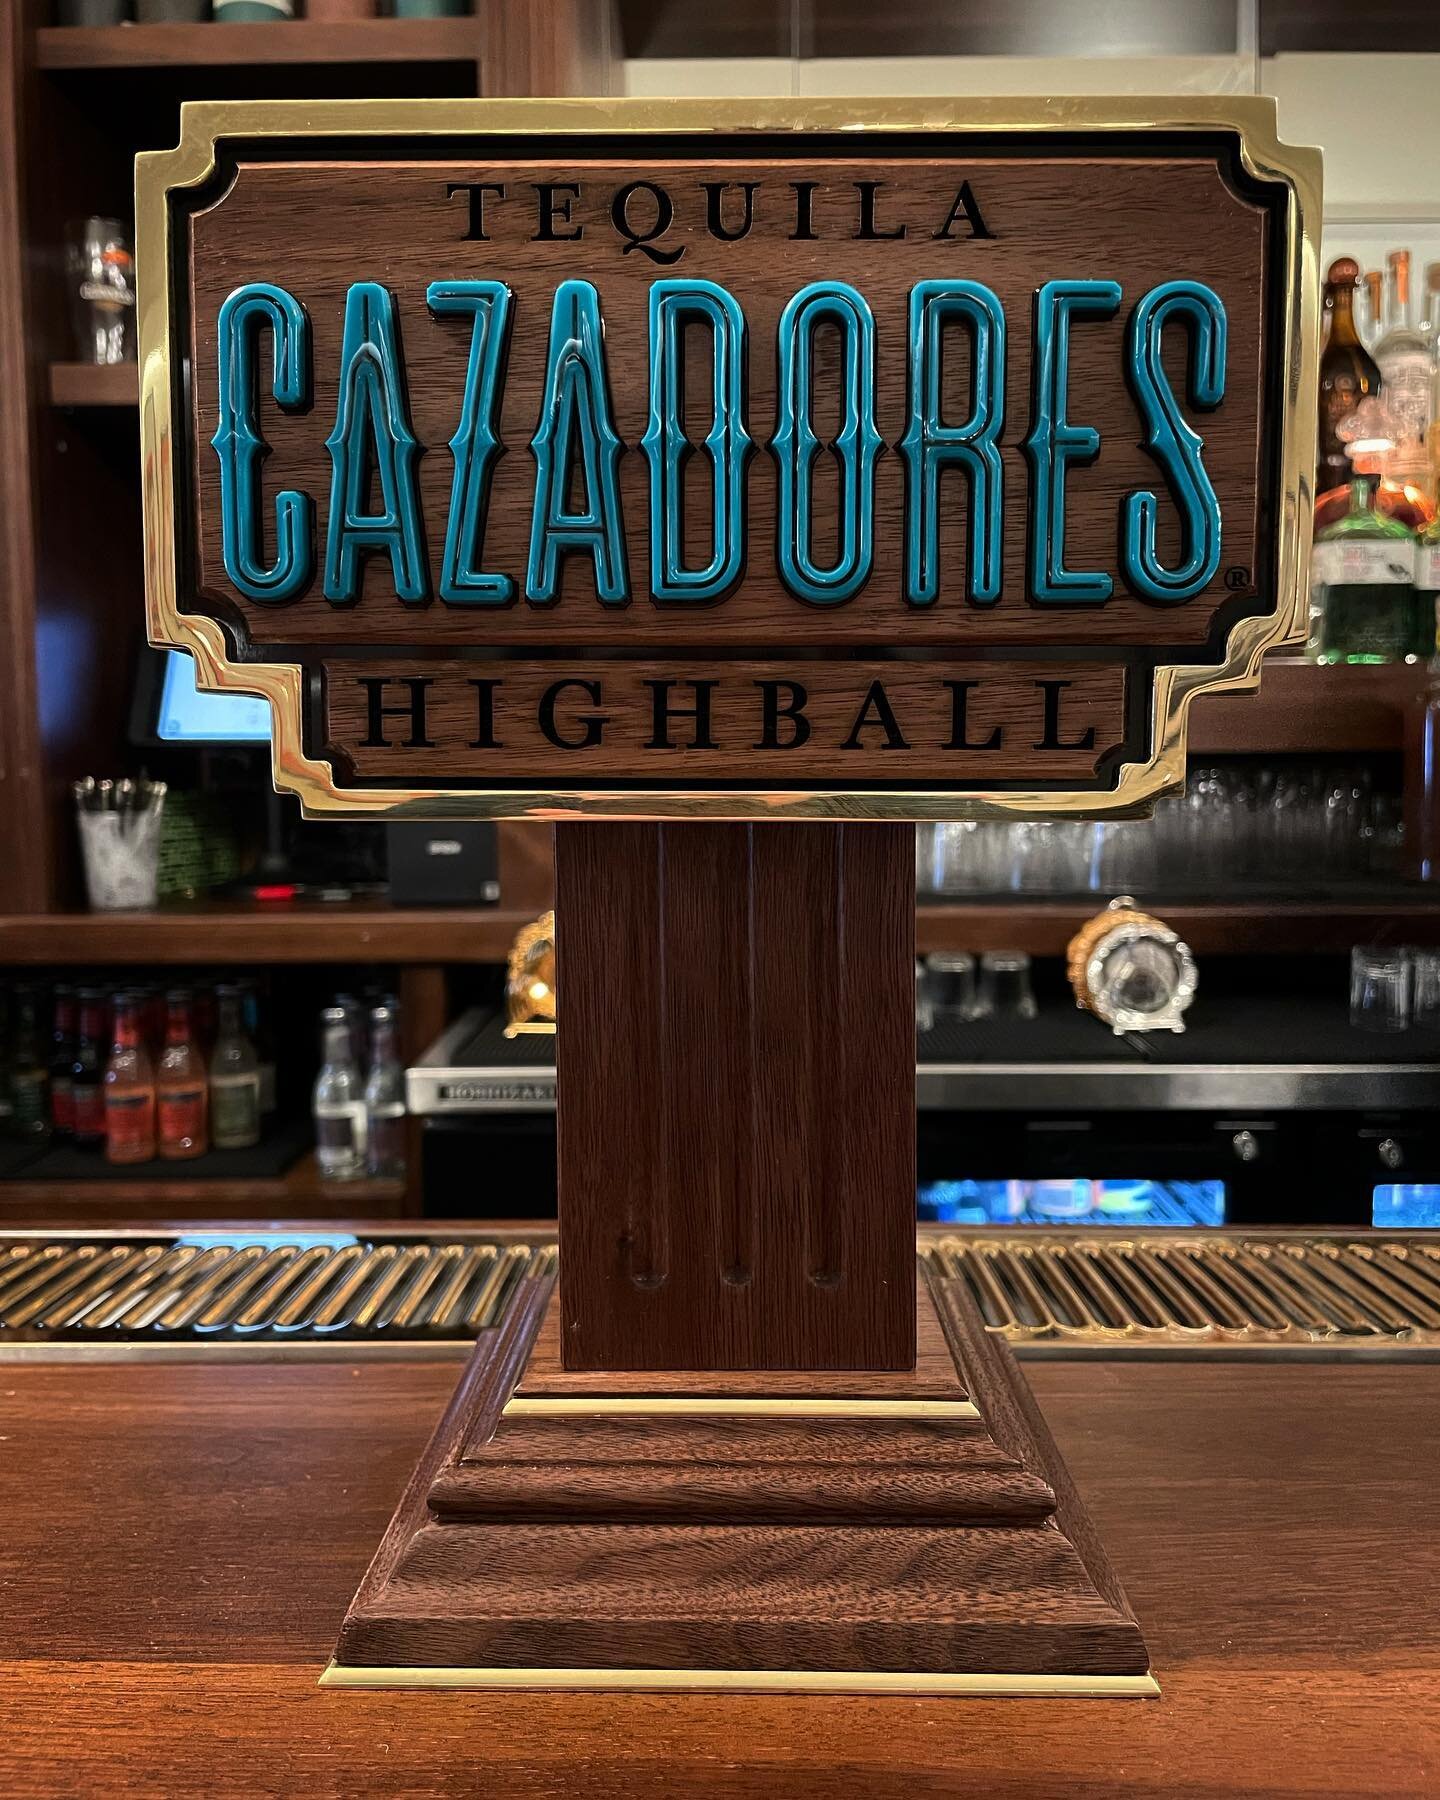 NYC&rsquo;s FIRST TEQUILA HIGHBALL MACHINE 

Friday&rsquo;s are all about our &ldquo;Hyped Up Highballs&rdquo; with @tequilacazadores